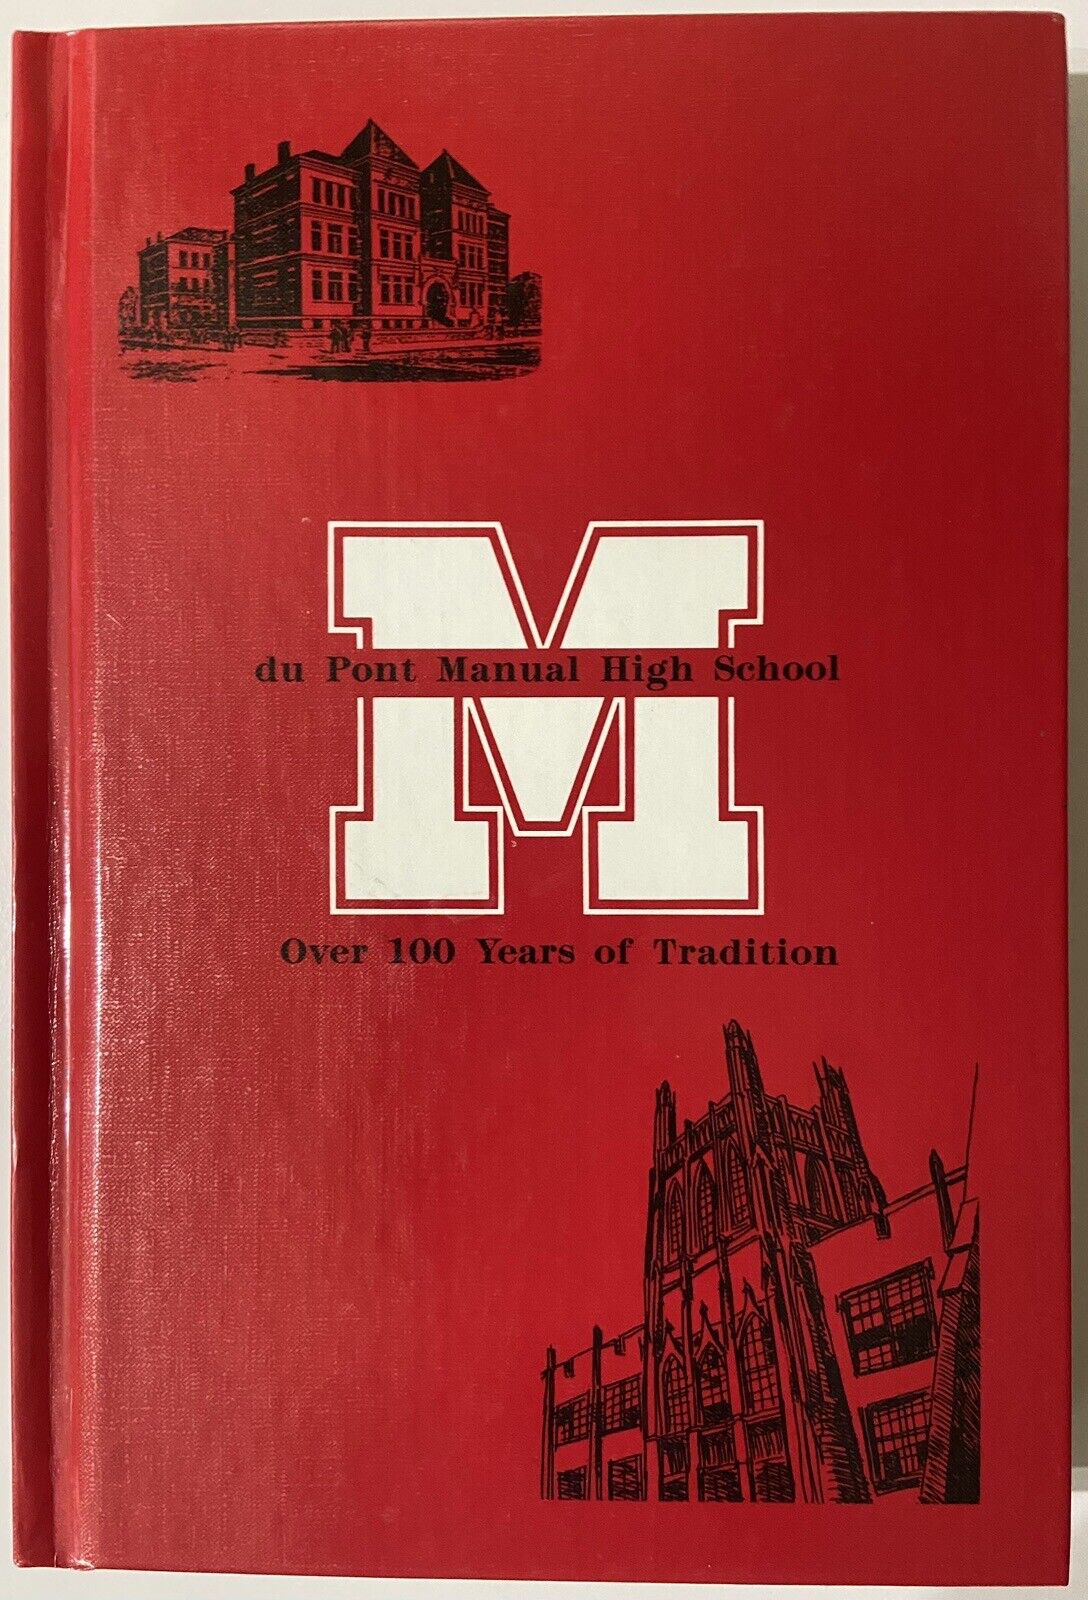 du Pont Manual High School, 1999 Alumni Directory: Over 100 Years of Tradition